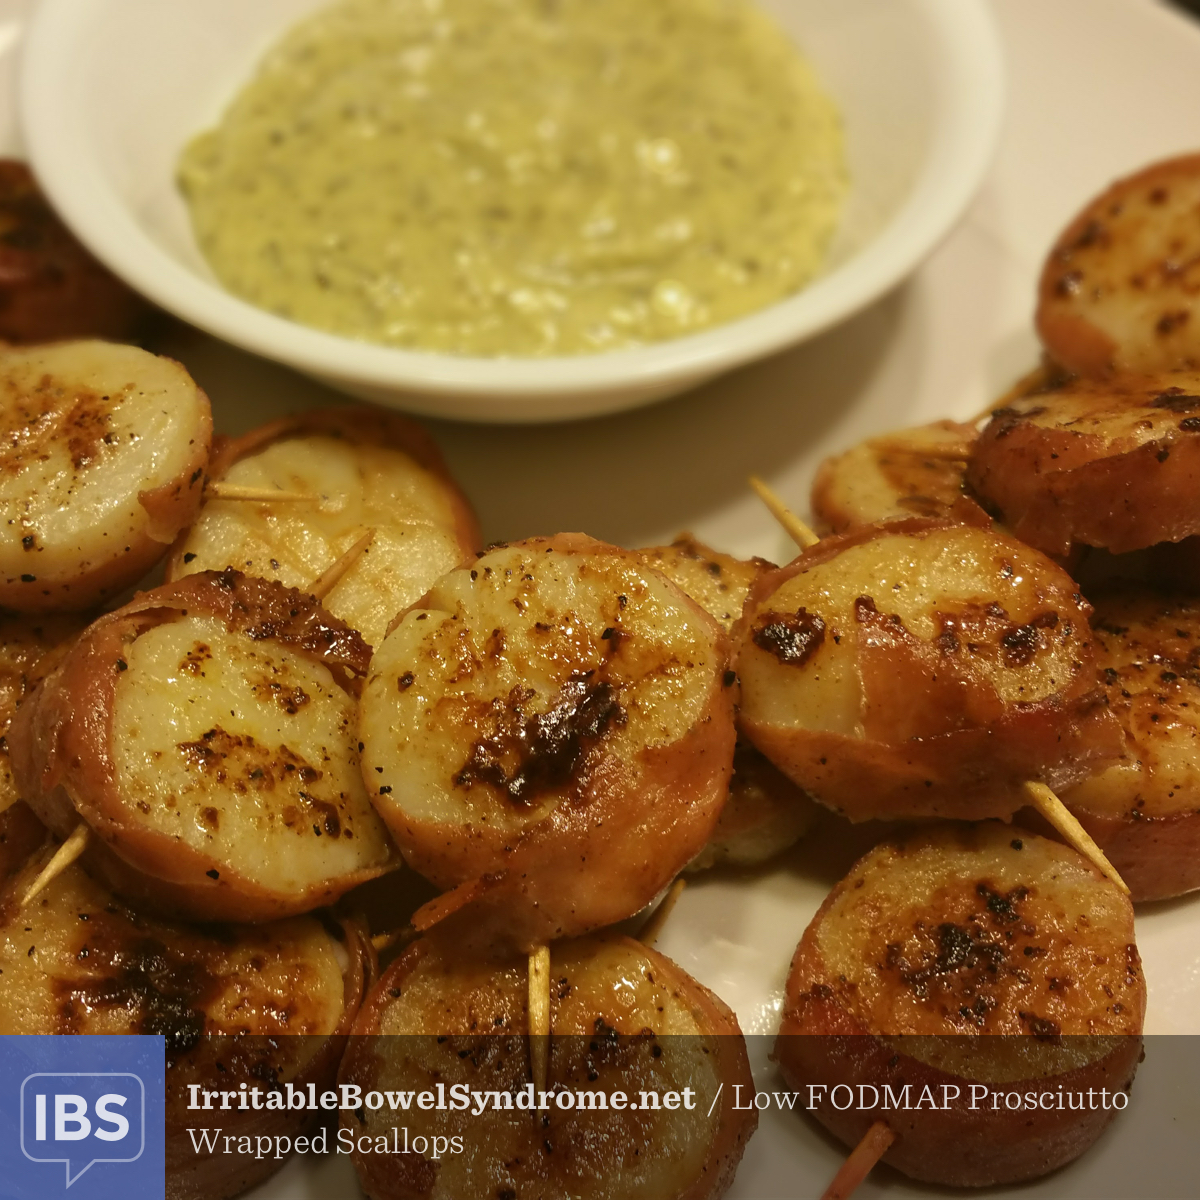 Low FODMAP Prosciutto Wrapped Scallops